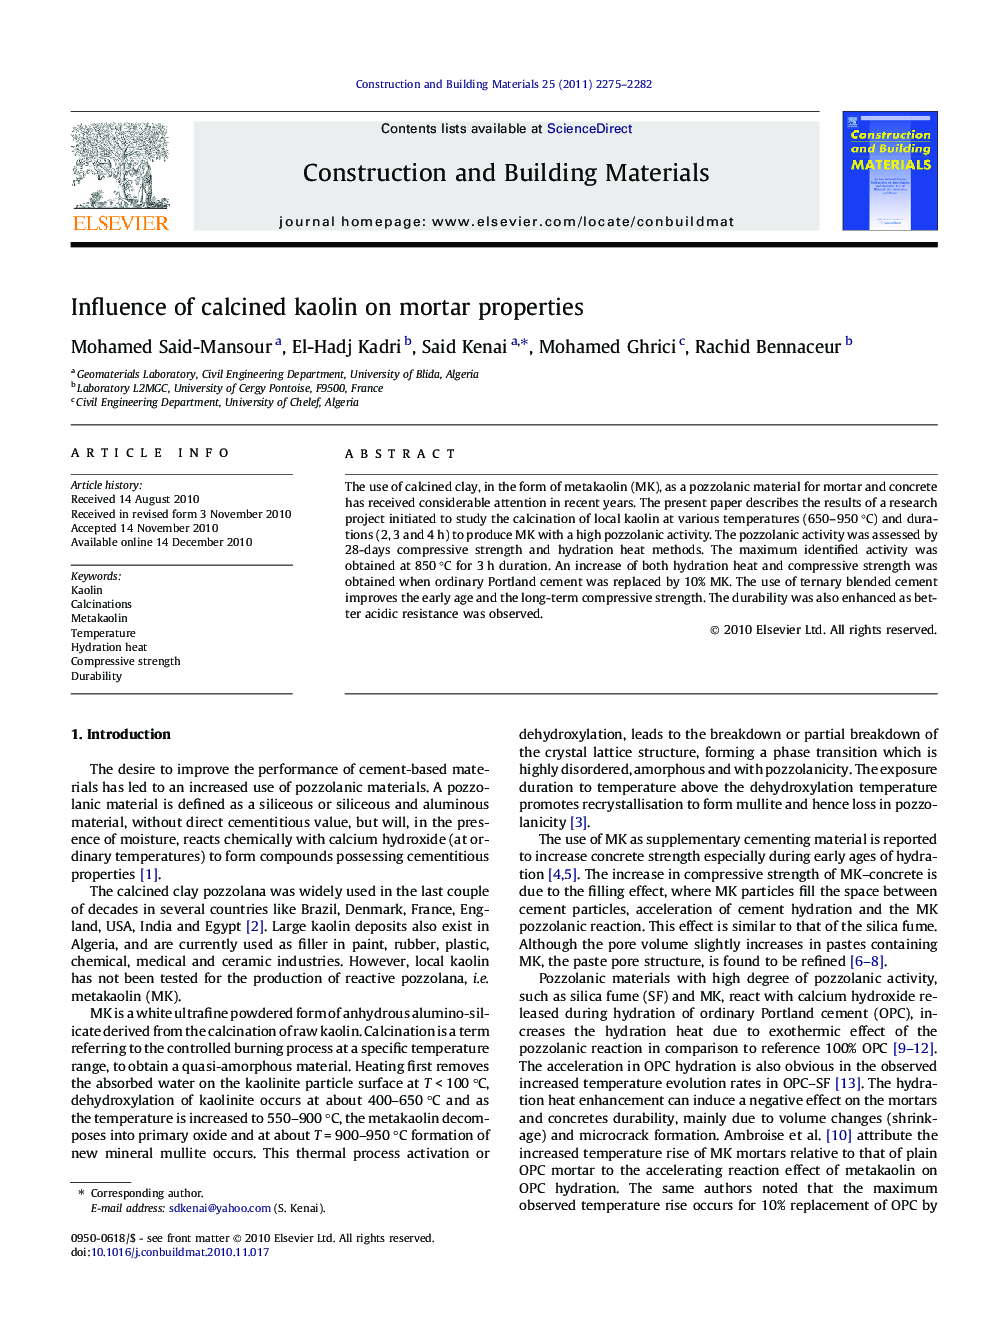 Influence of calcined kaolin on mortar properties